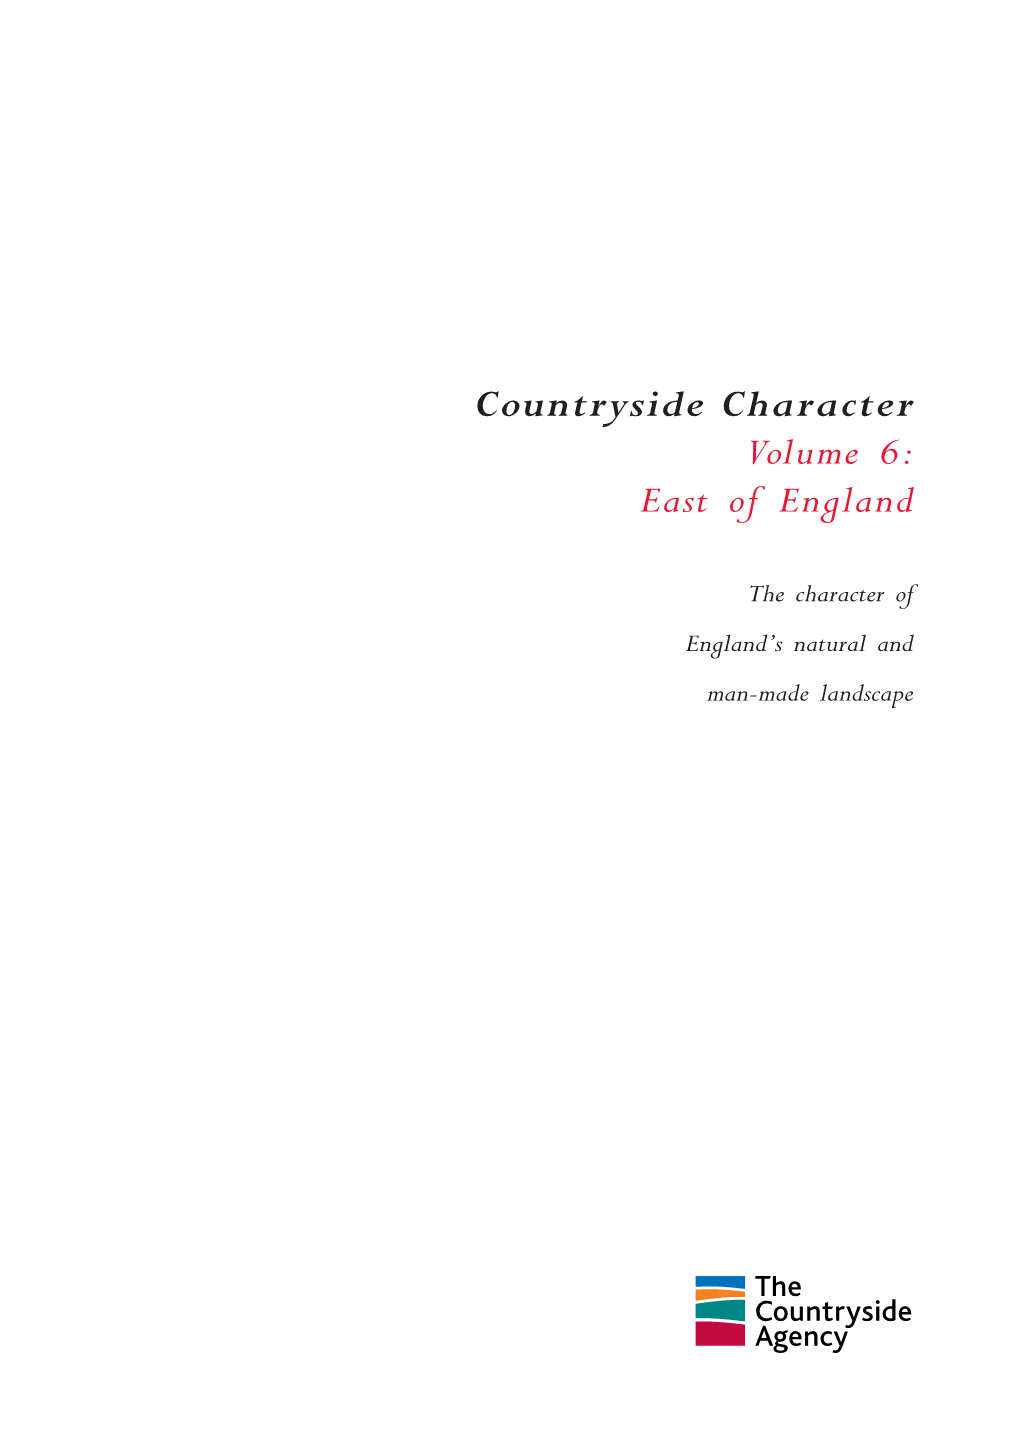 Countryside Character Volume 6: East of England